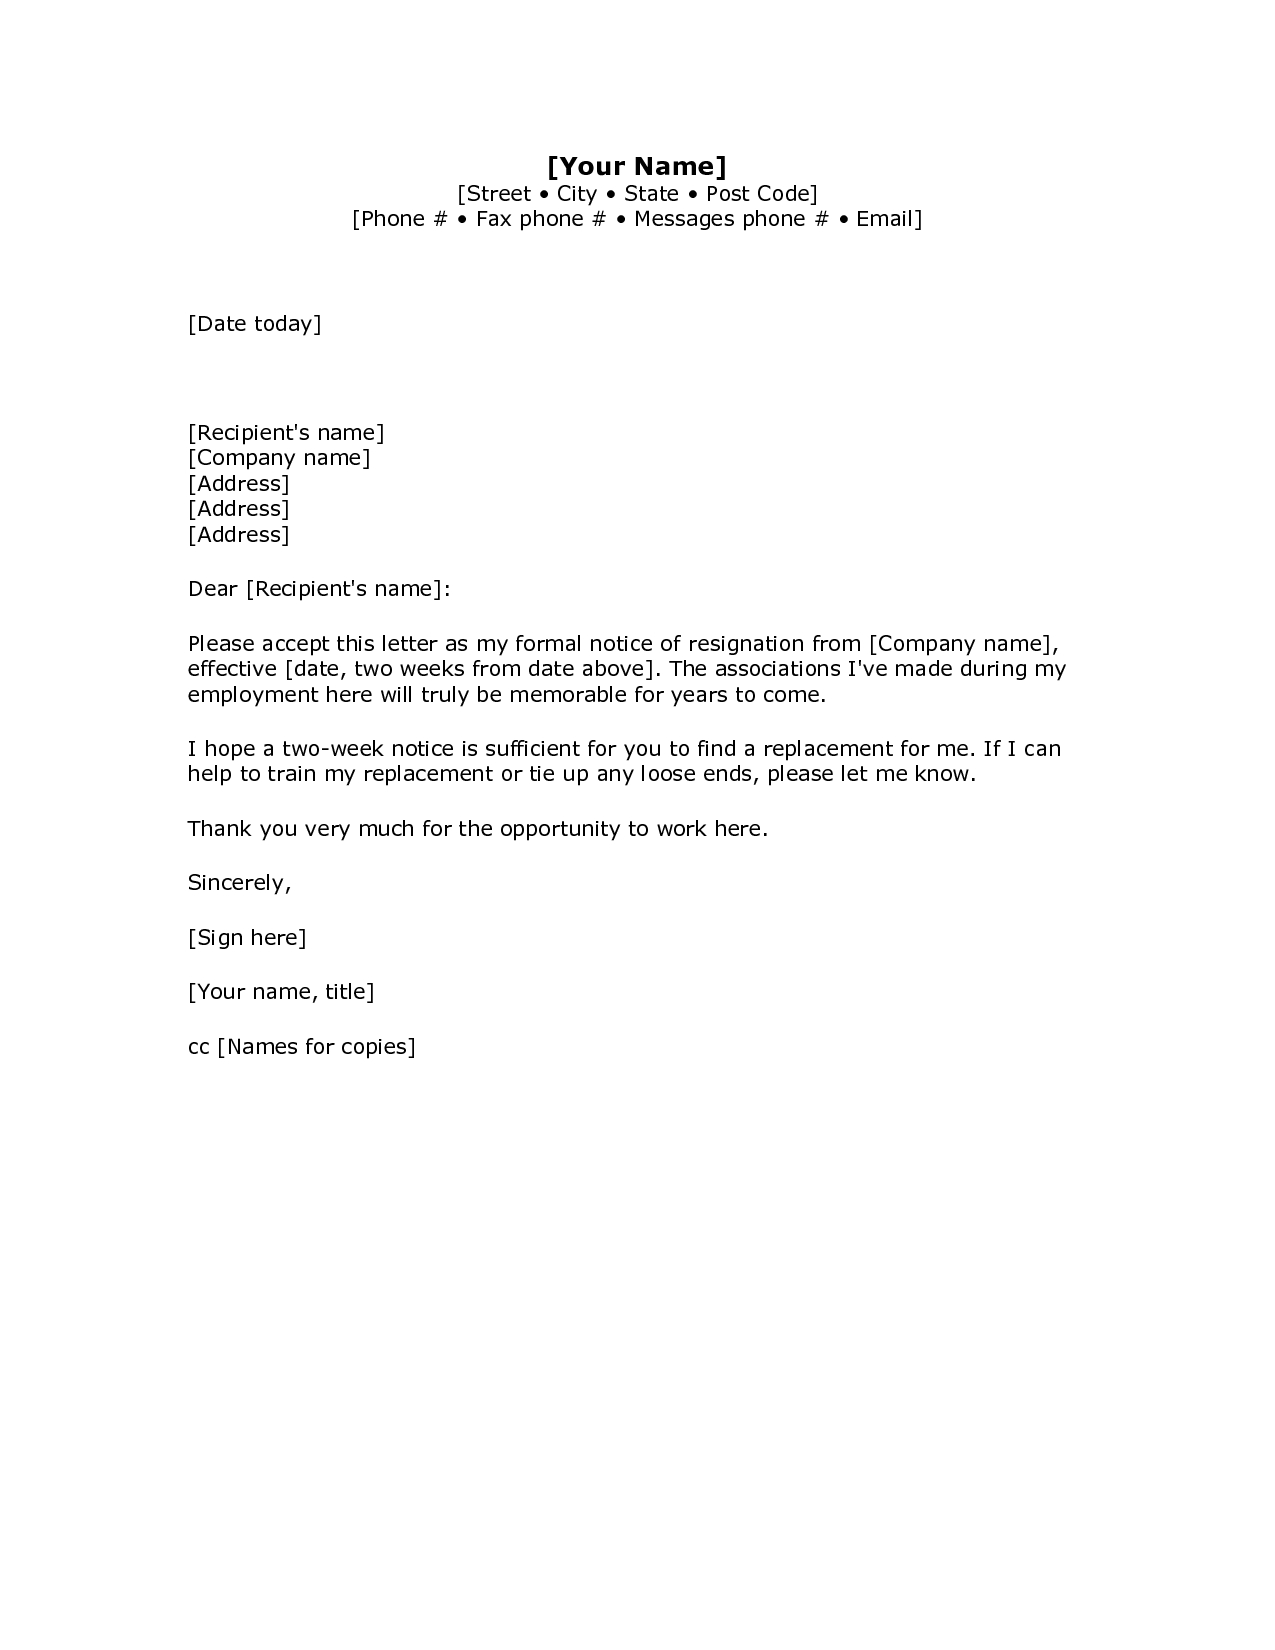 Opt Offer Letter Template Examples Letter Template Collection